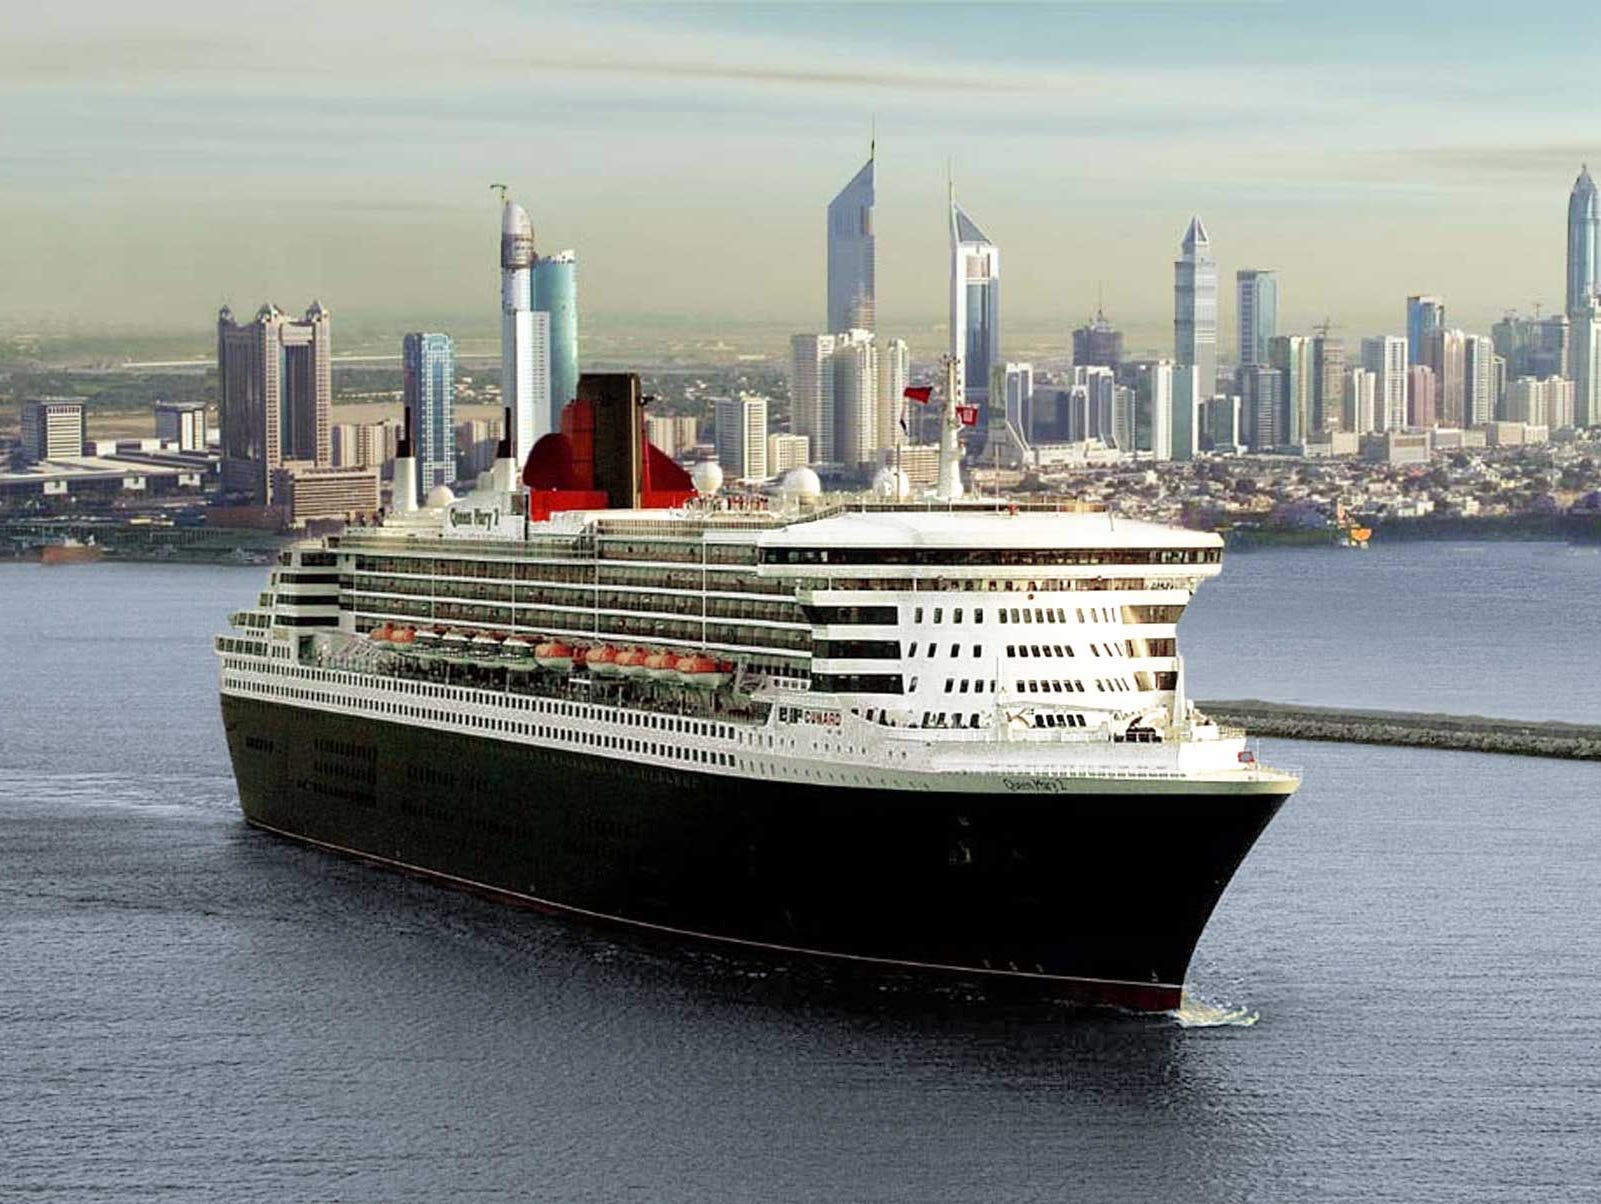 8. Queen Mary 2, built by Cunard Line in 2004, weighs 148,528 GT and carries 2,592 passengers at double occupancy.